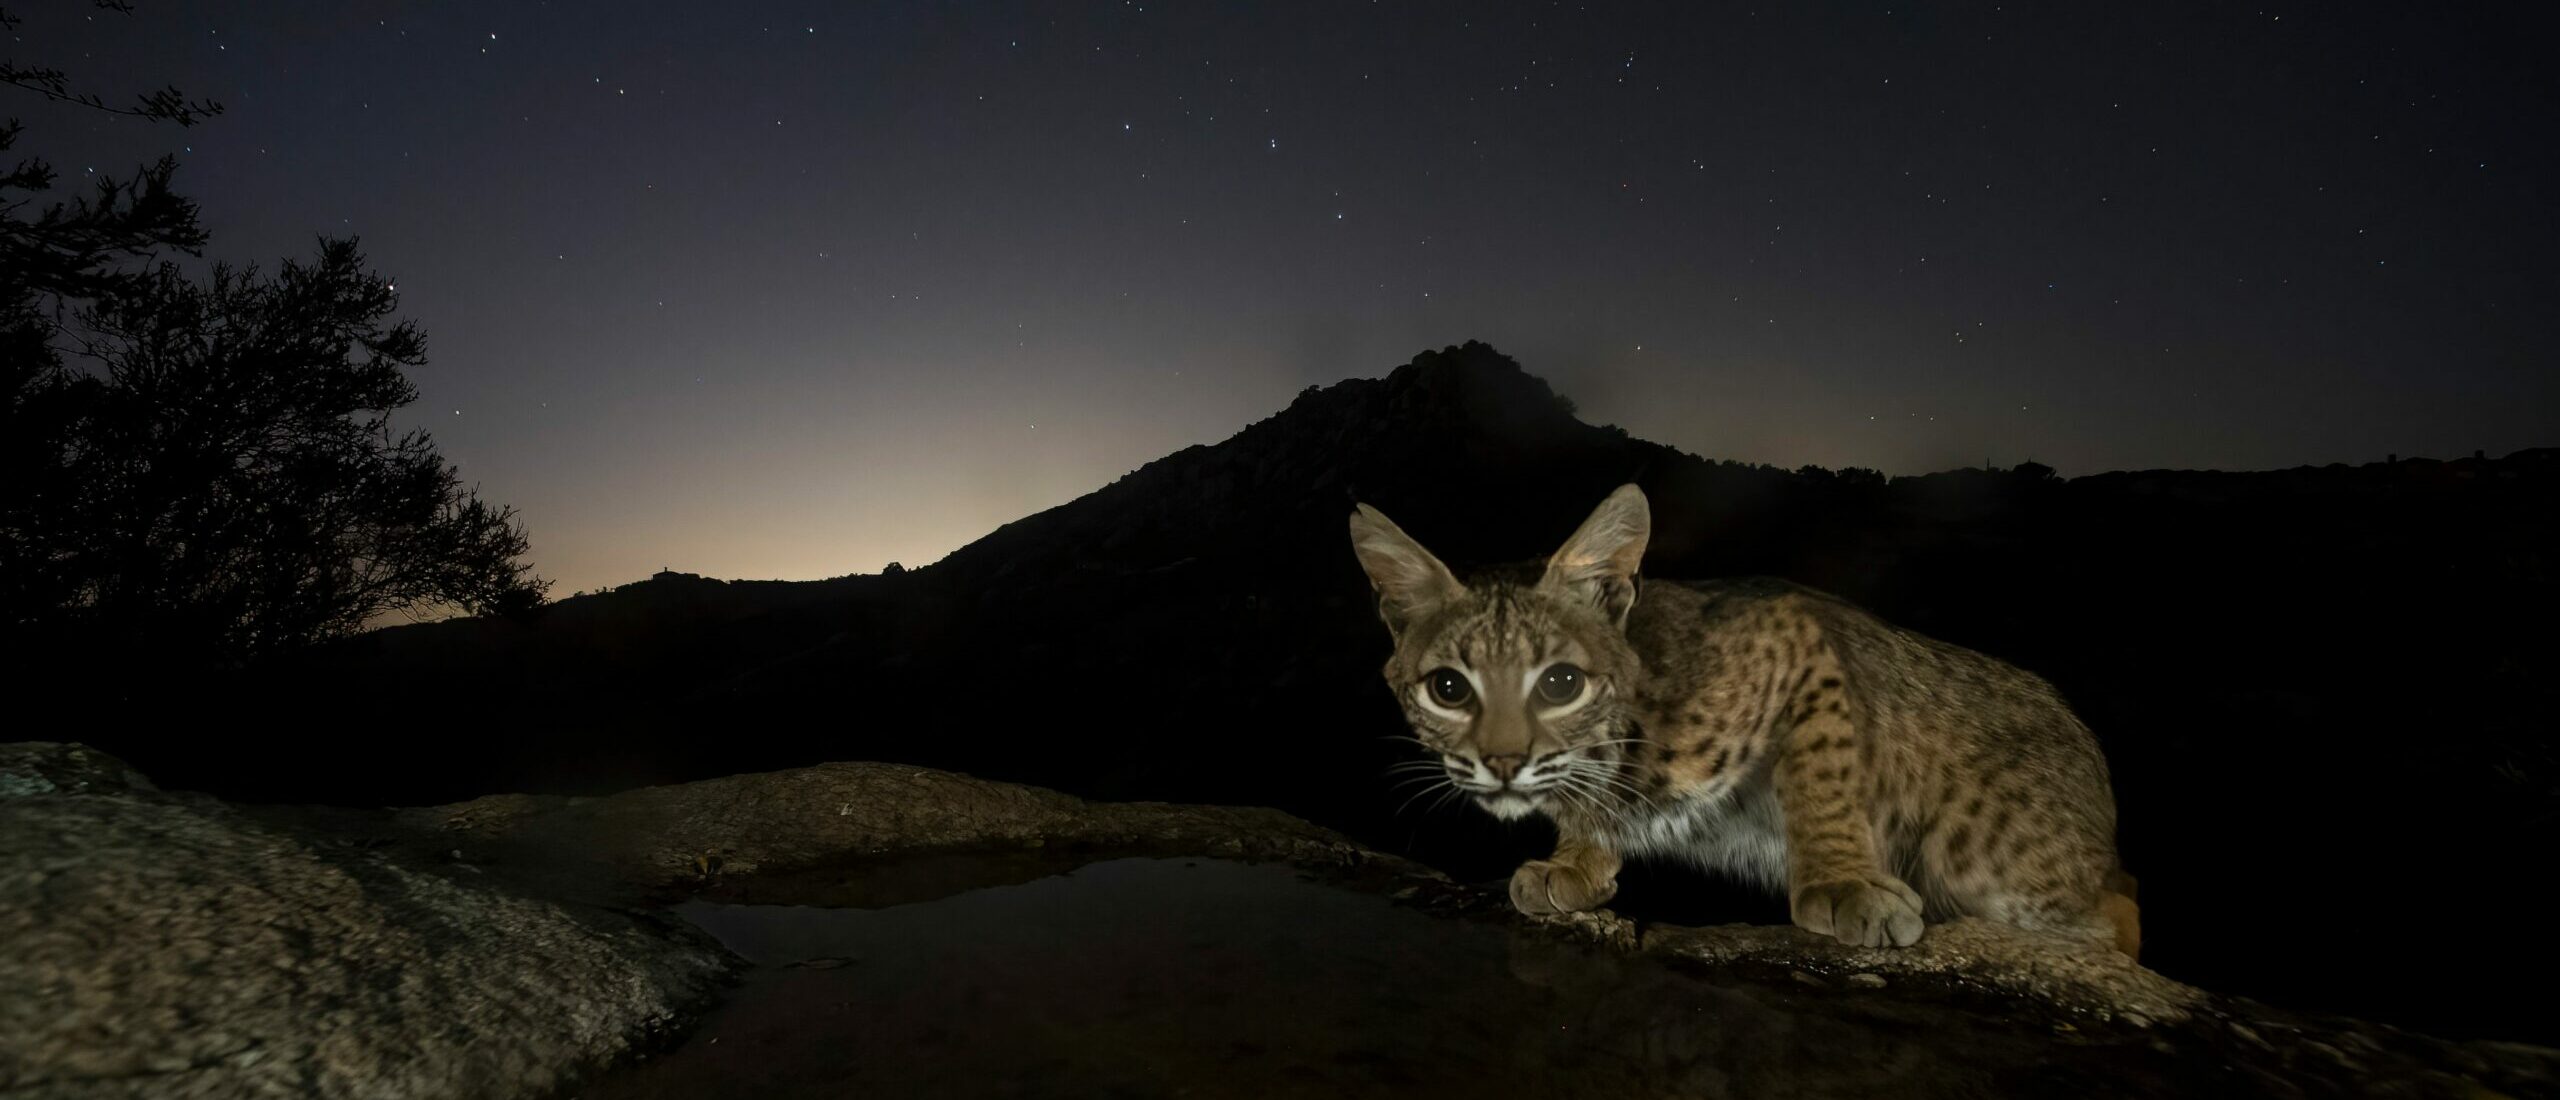 bobcat on a rock at night in the desert with stars in the sky